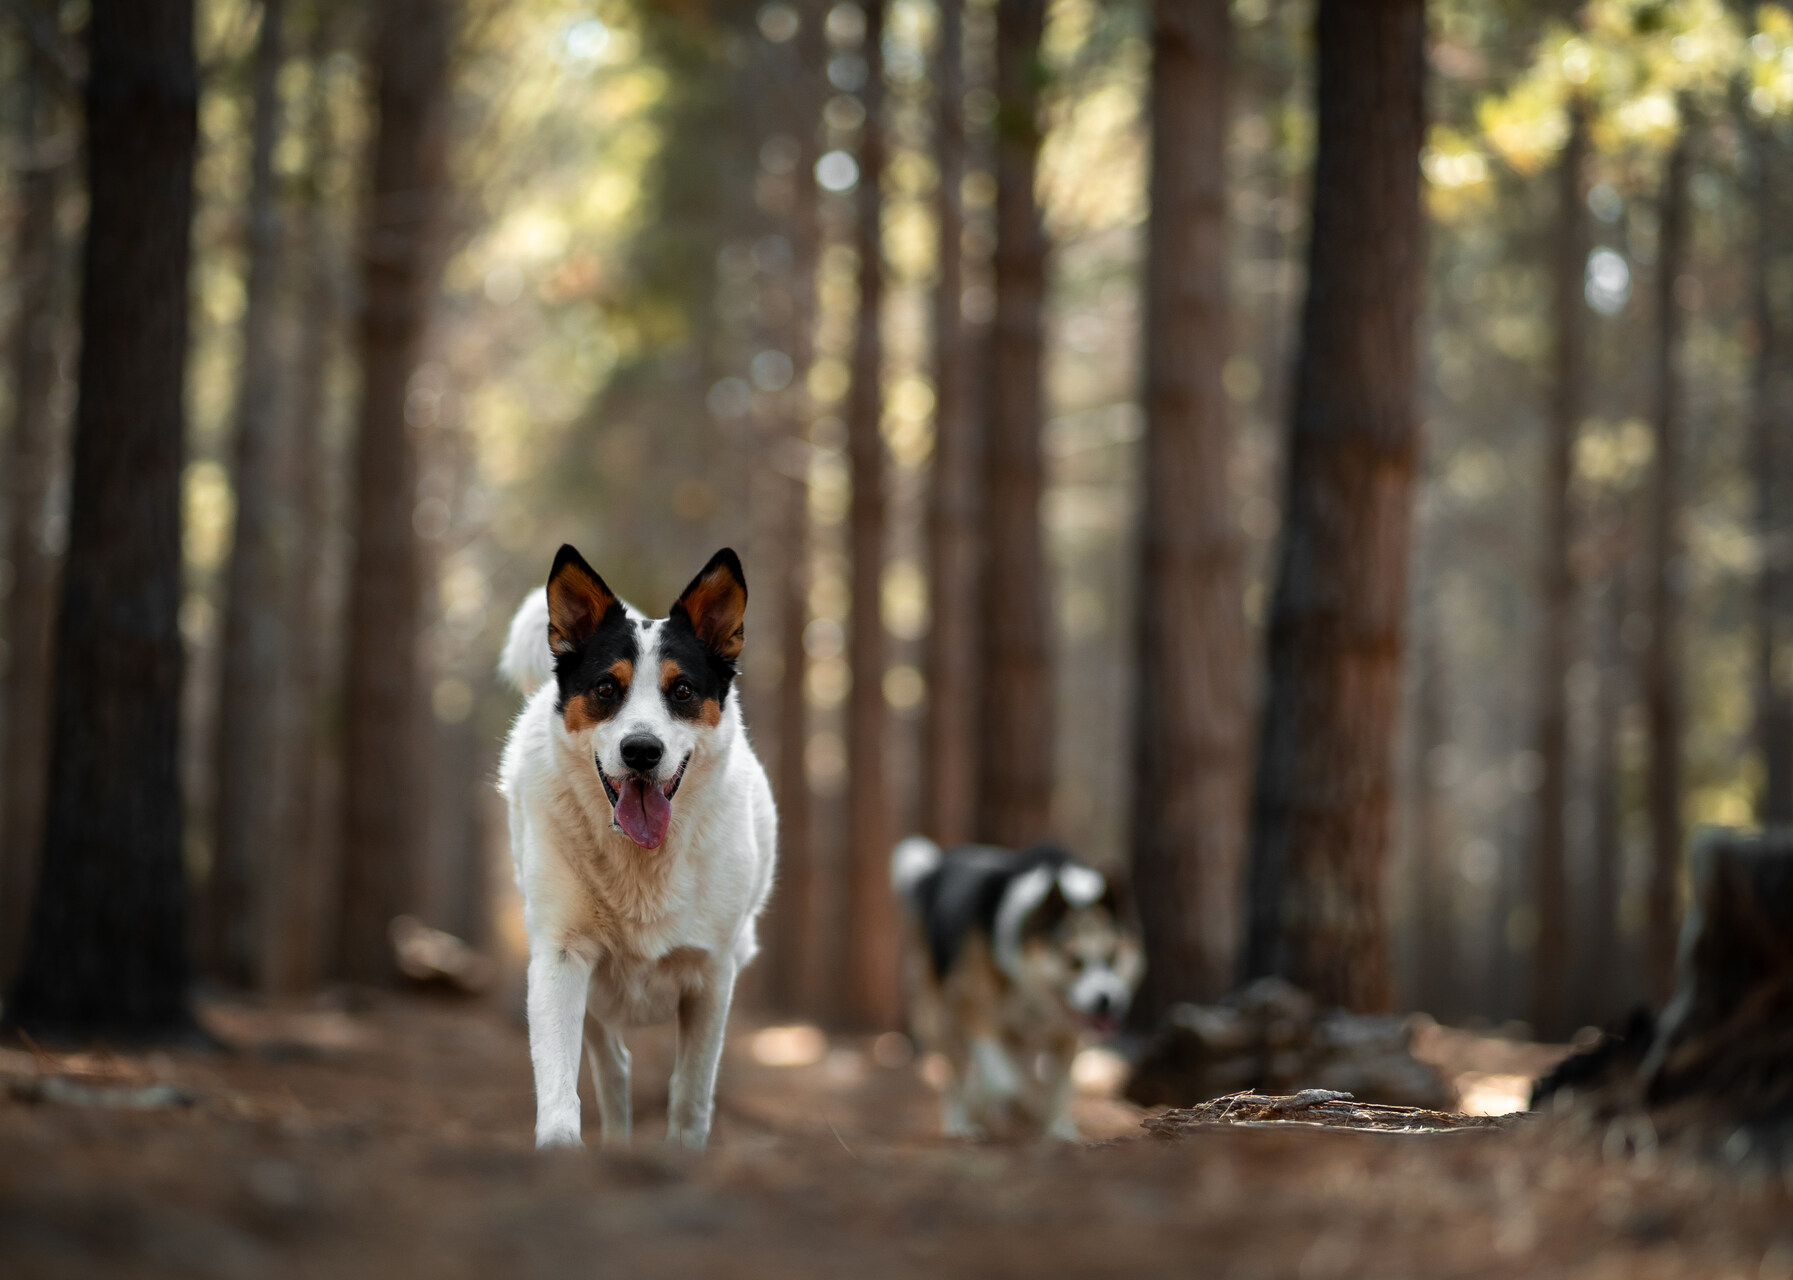 Two dogs walking through a forest